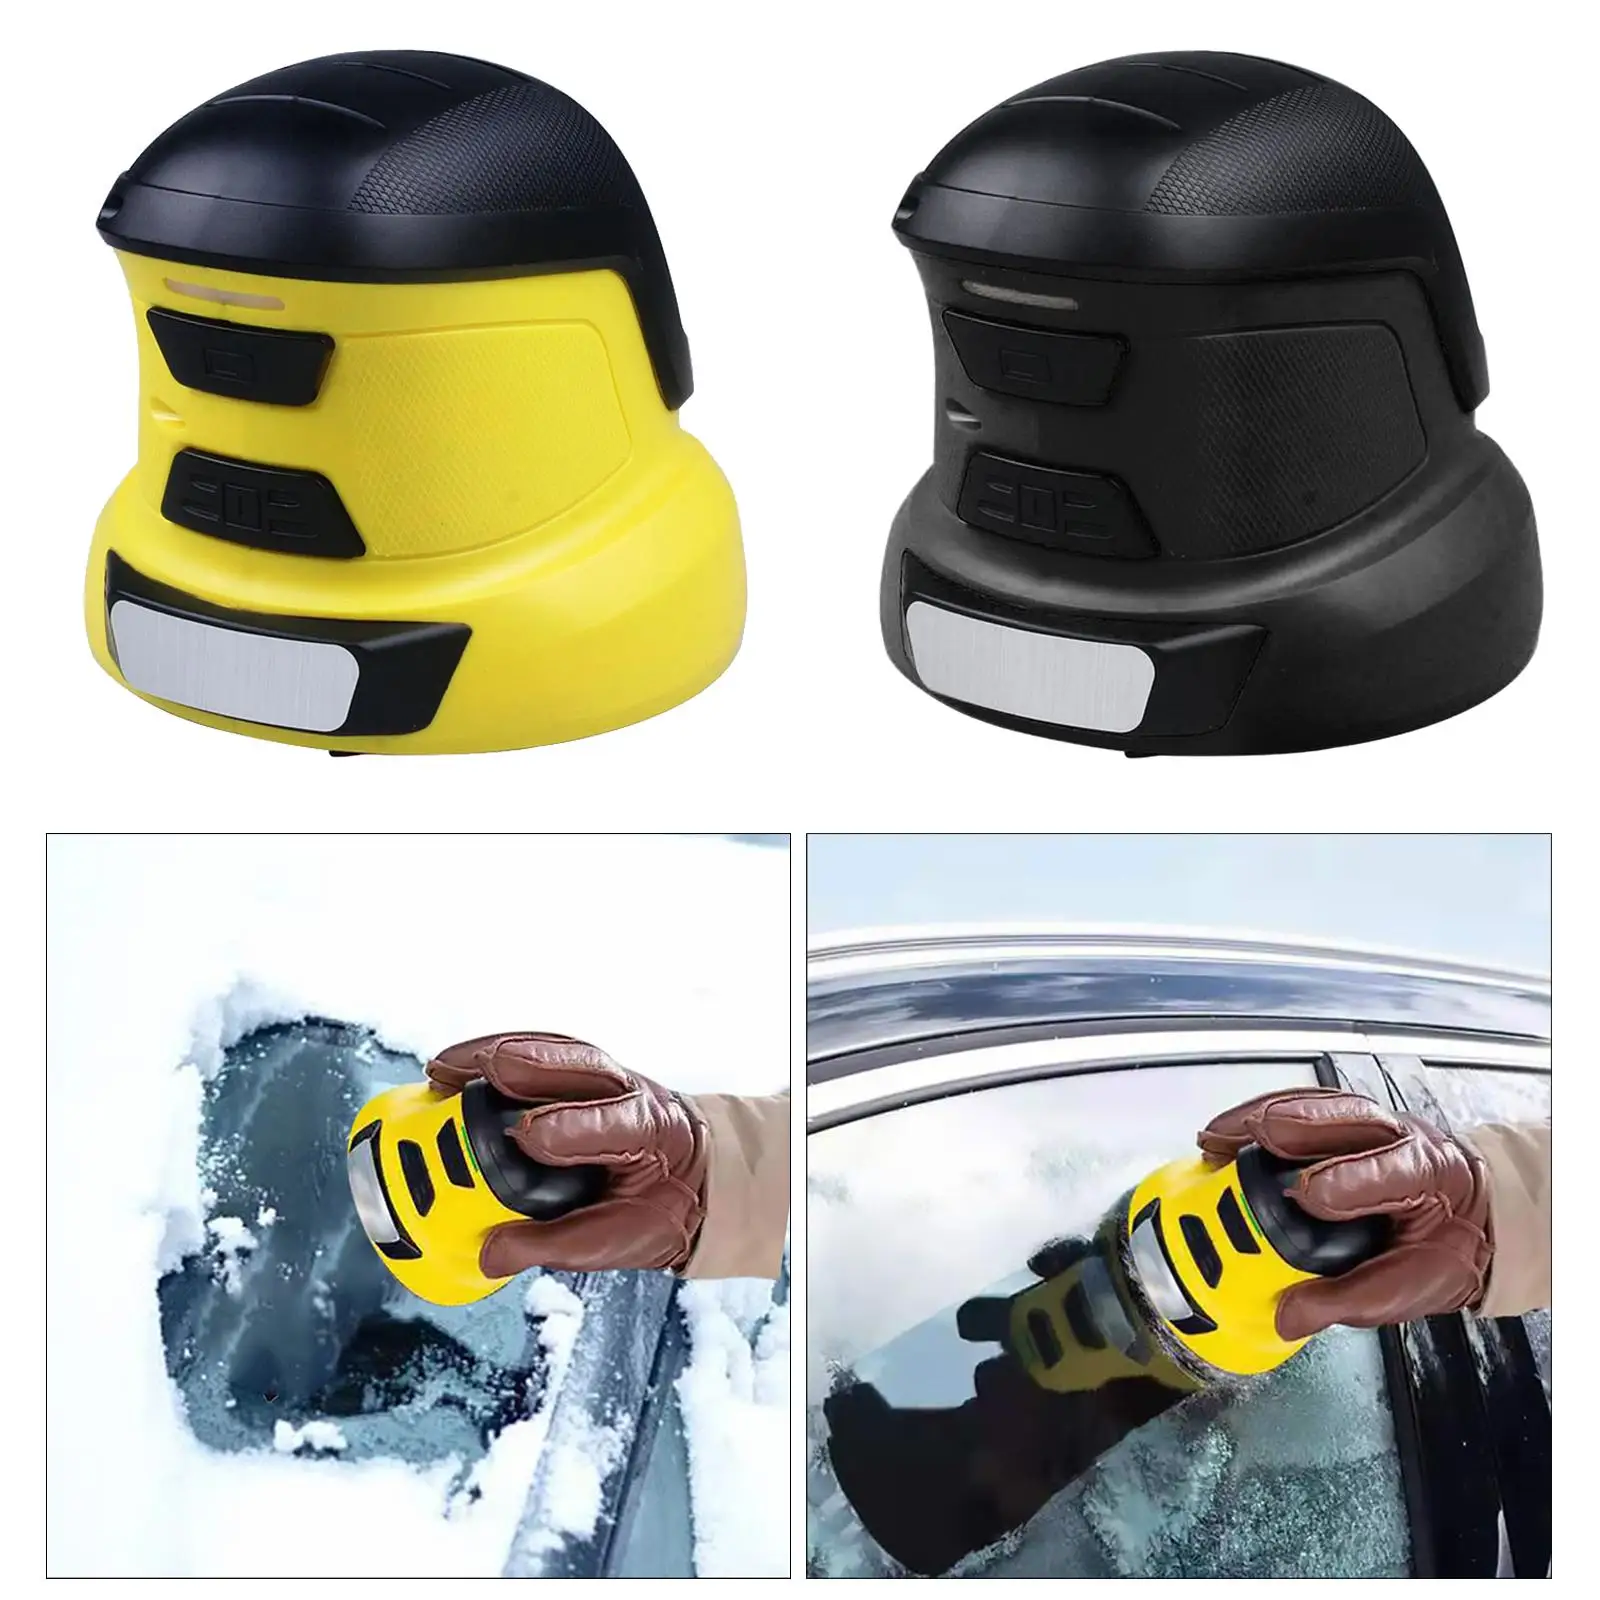  Deicer Ice Snow Scraper USB Rechargeable Lightweight ,No Damage to The Glass Quickly and Efficiently Easy to Grip Cleaning